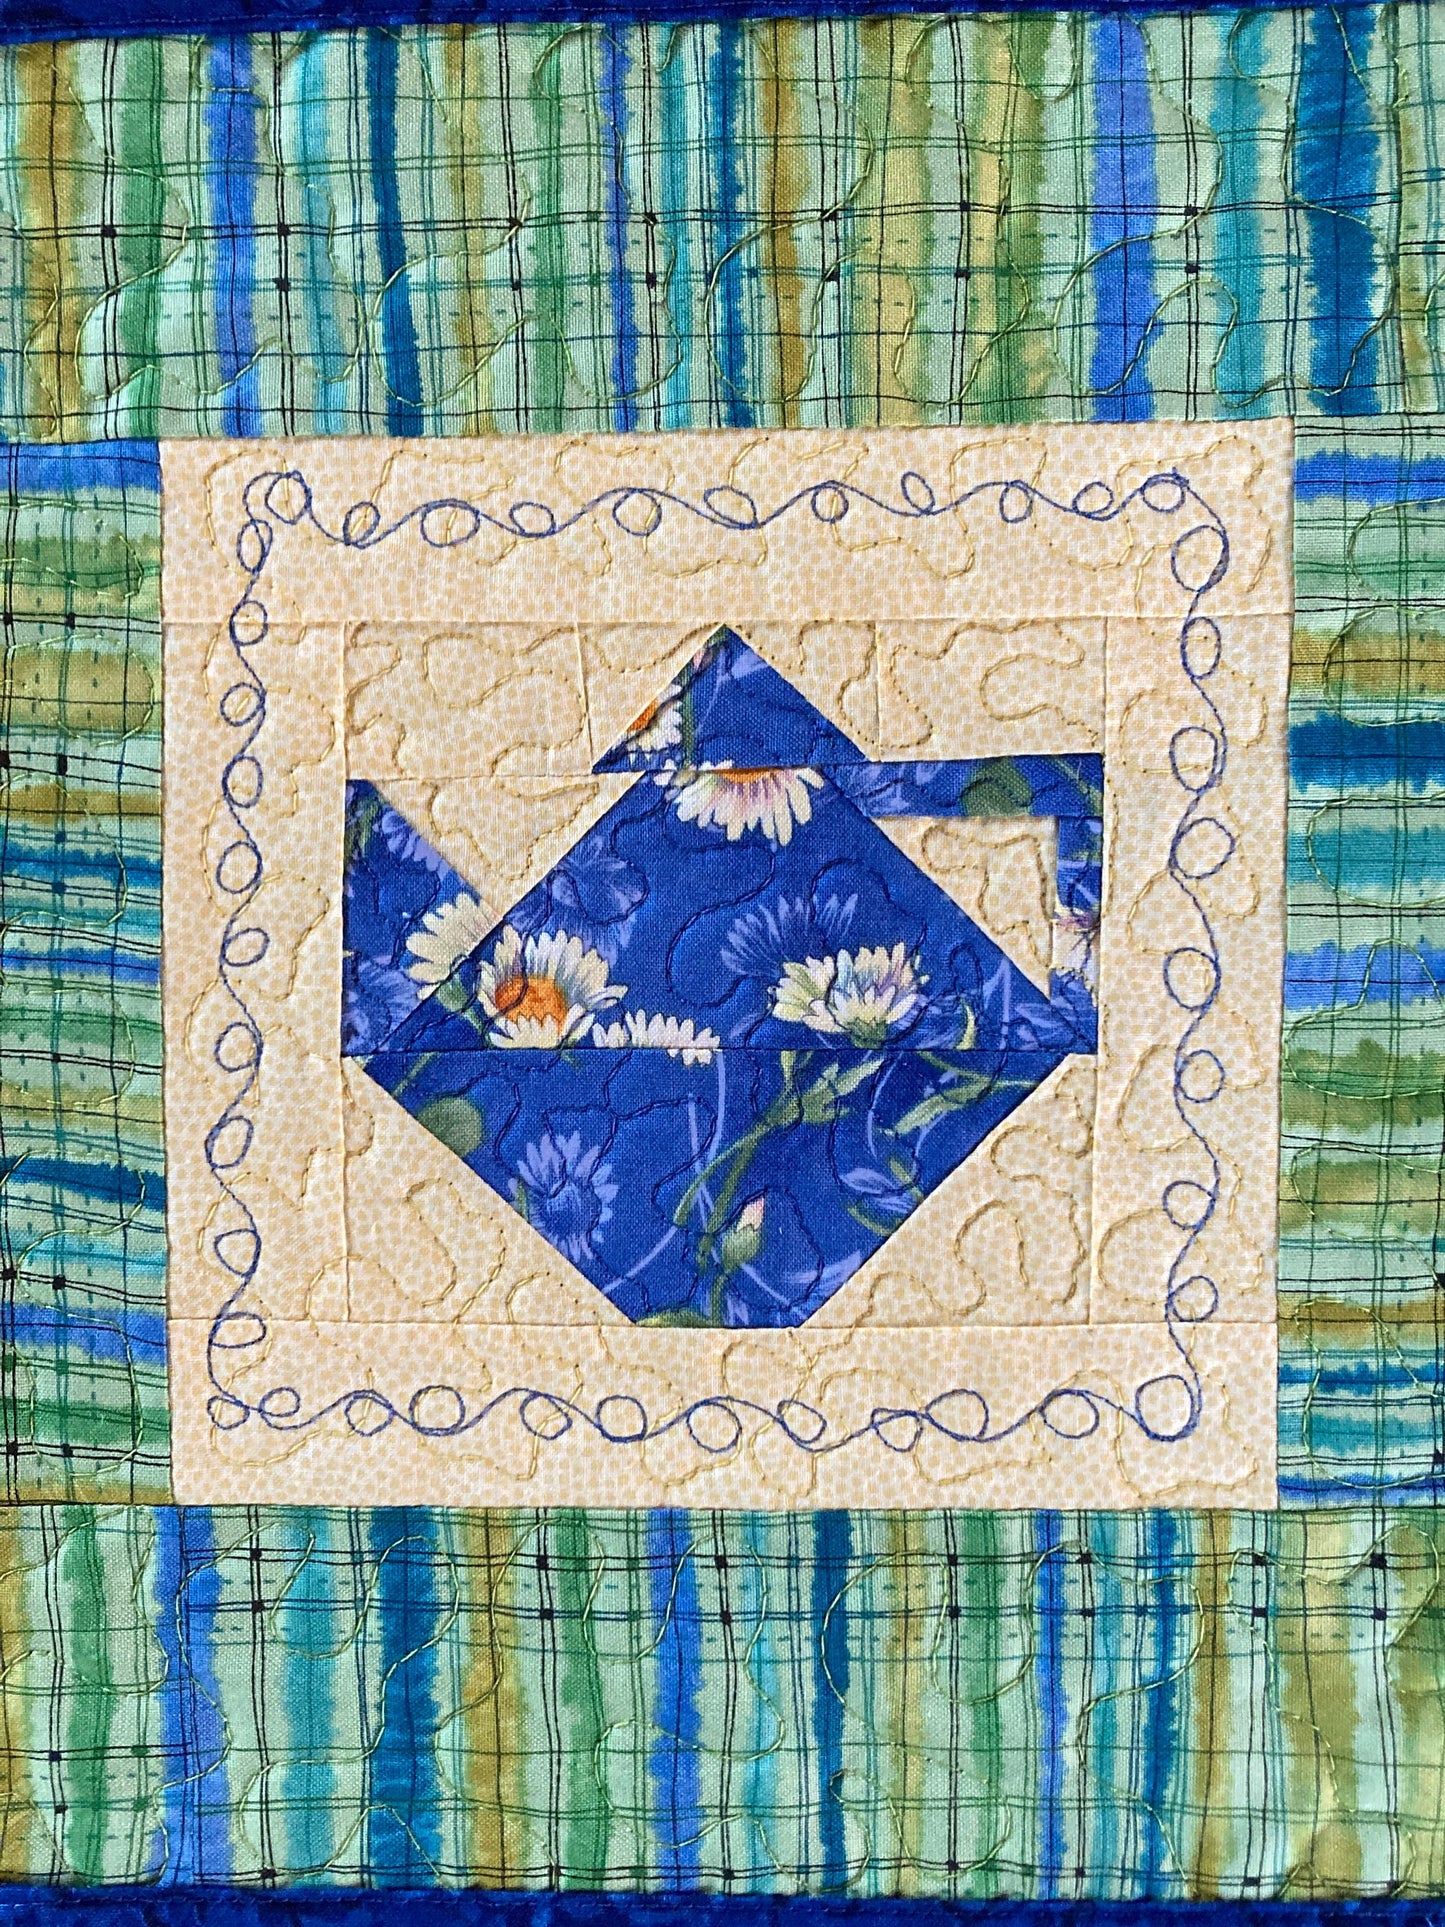 Blue Yellow Daisies Teapot Fabric Wall Hanging, Textile Wall Tapestry 12x12", Kitchen Wall Decor, Flower Teapot Art Handmade Tahoe Quilts